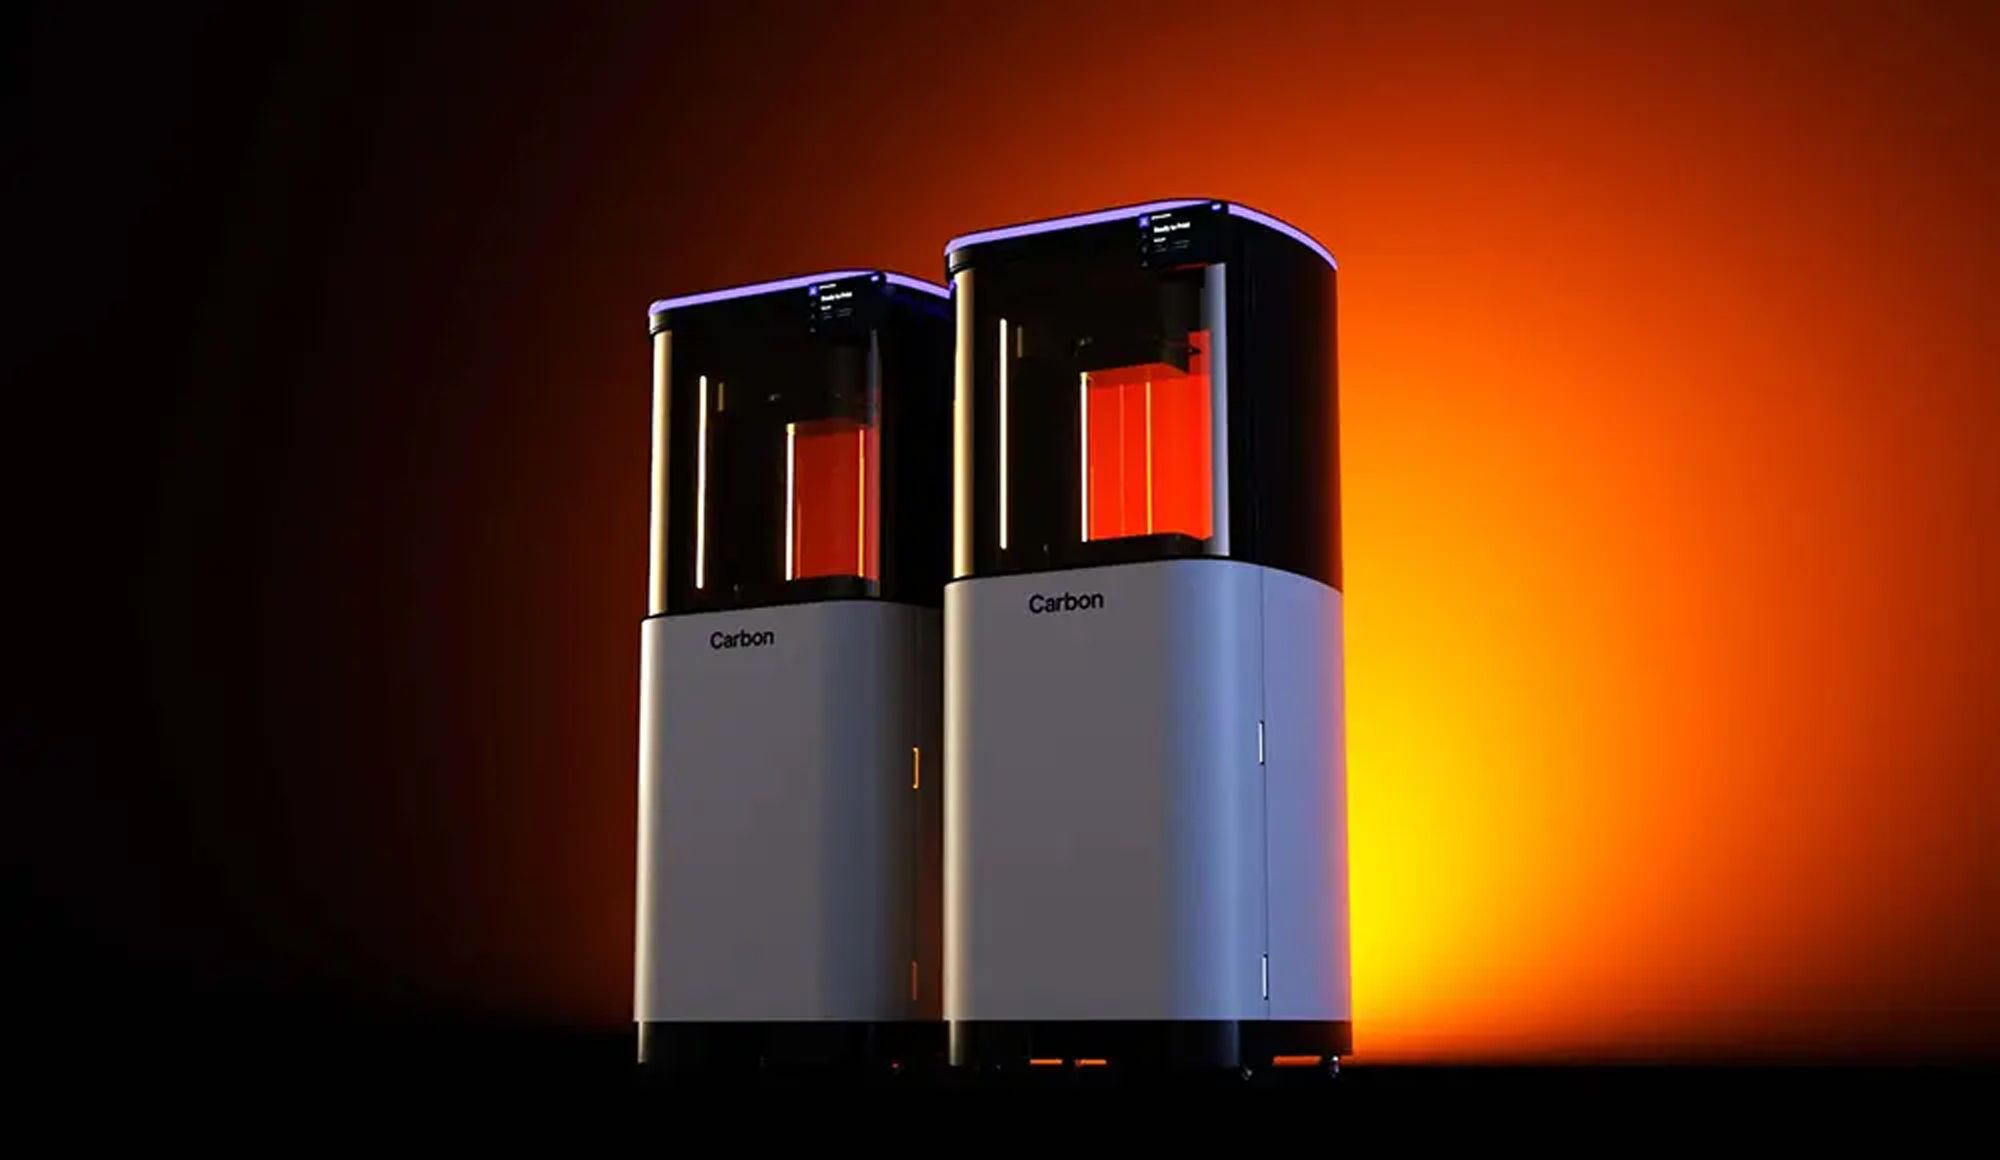 Carbon Launches M3 and M3 Max 3D Printers for Increased Speed, Reliability, and Accuracy